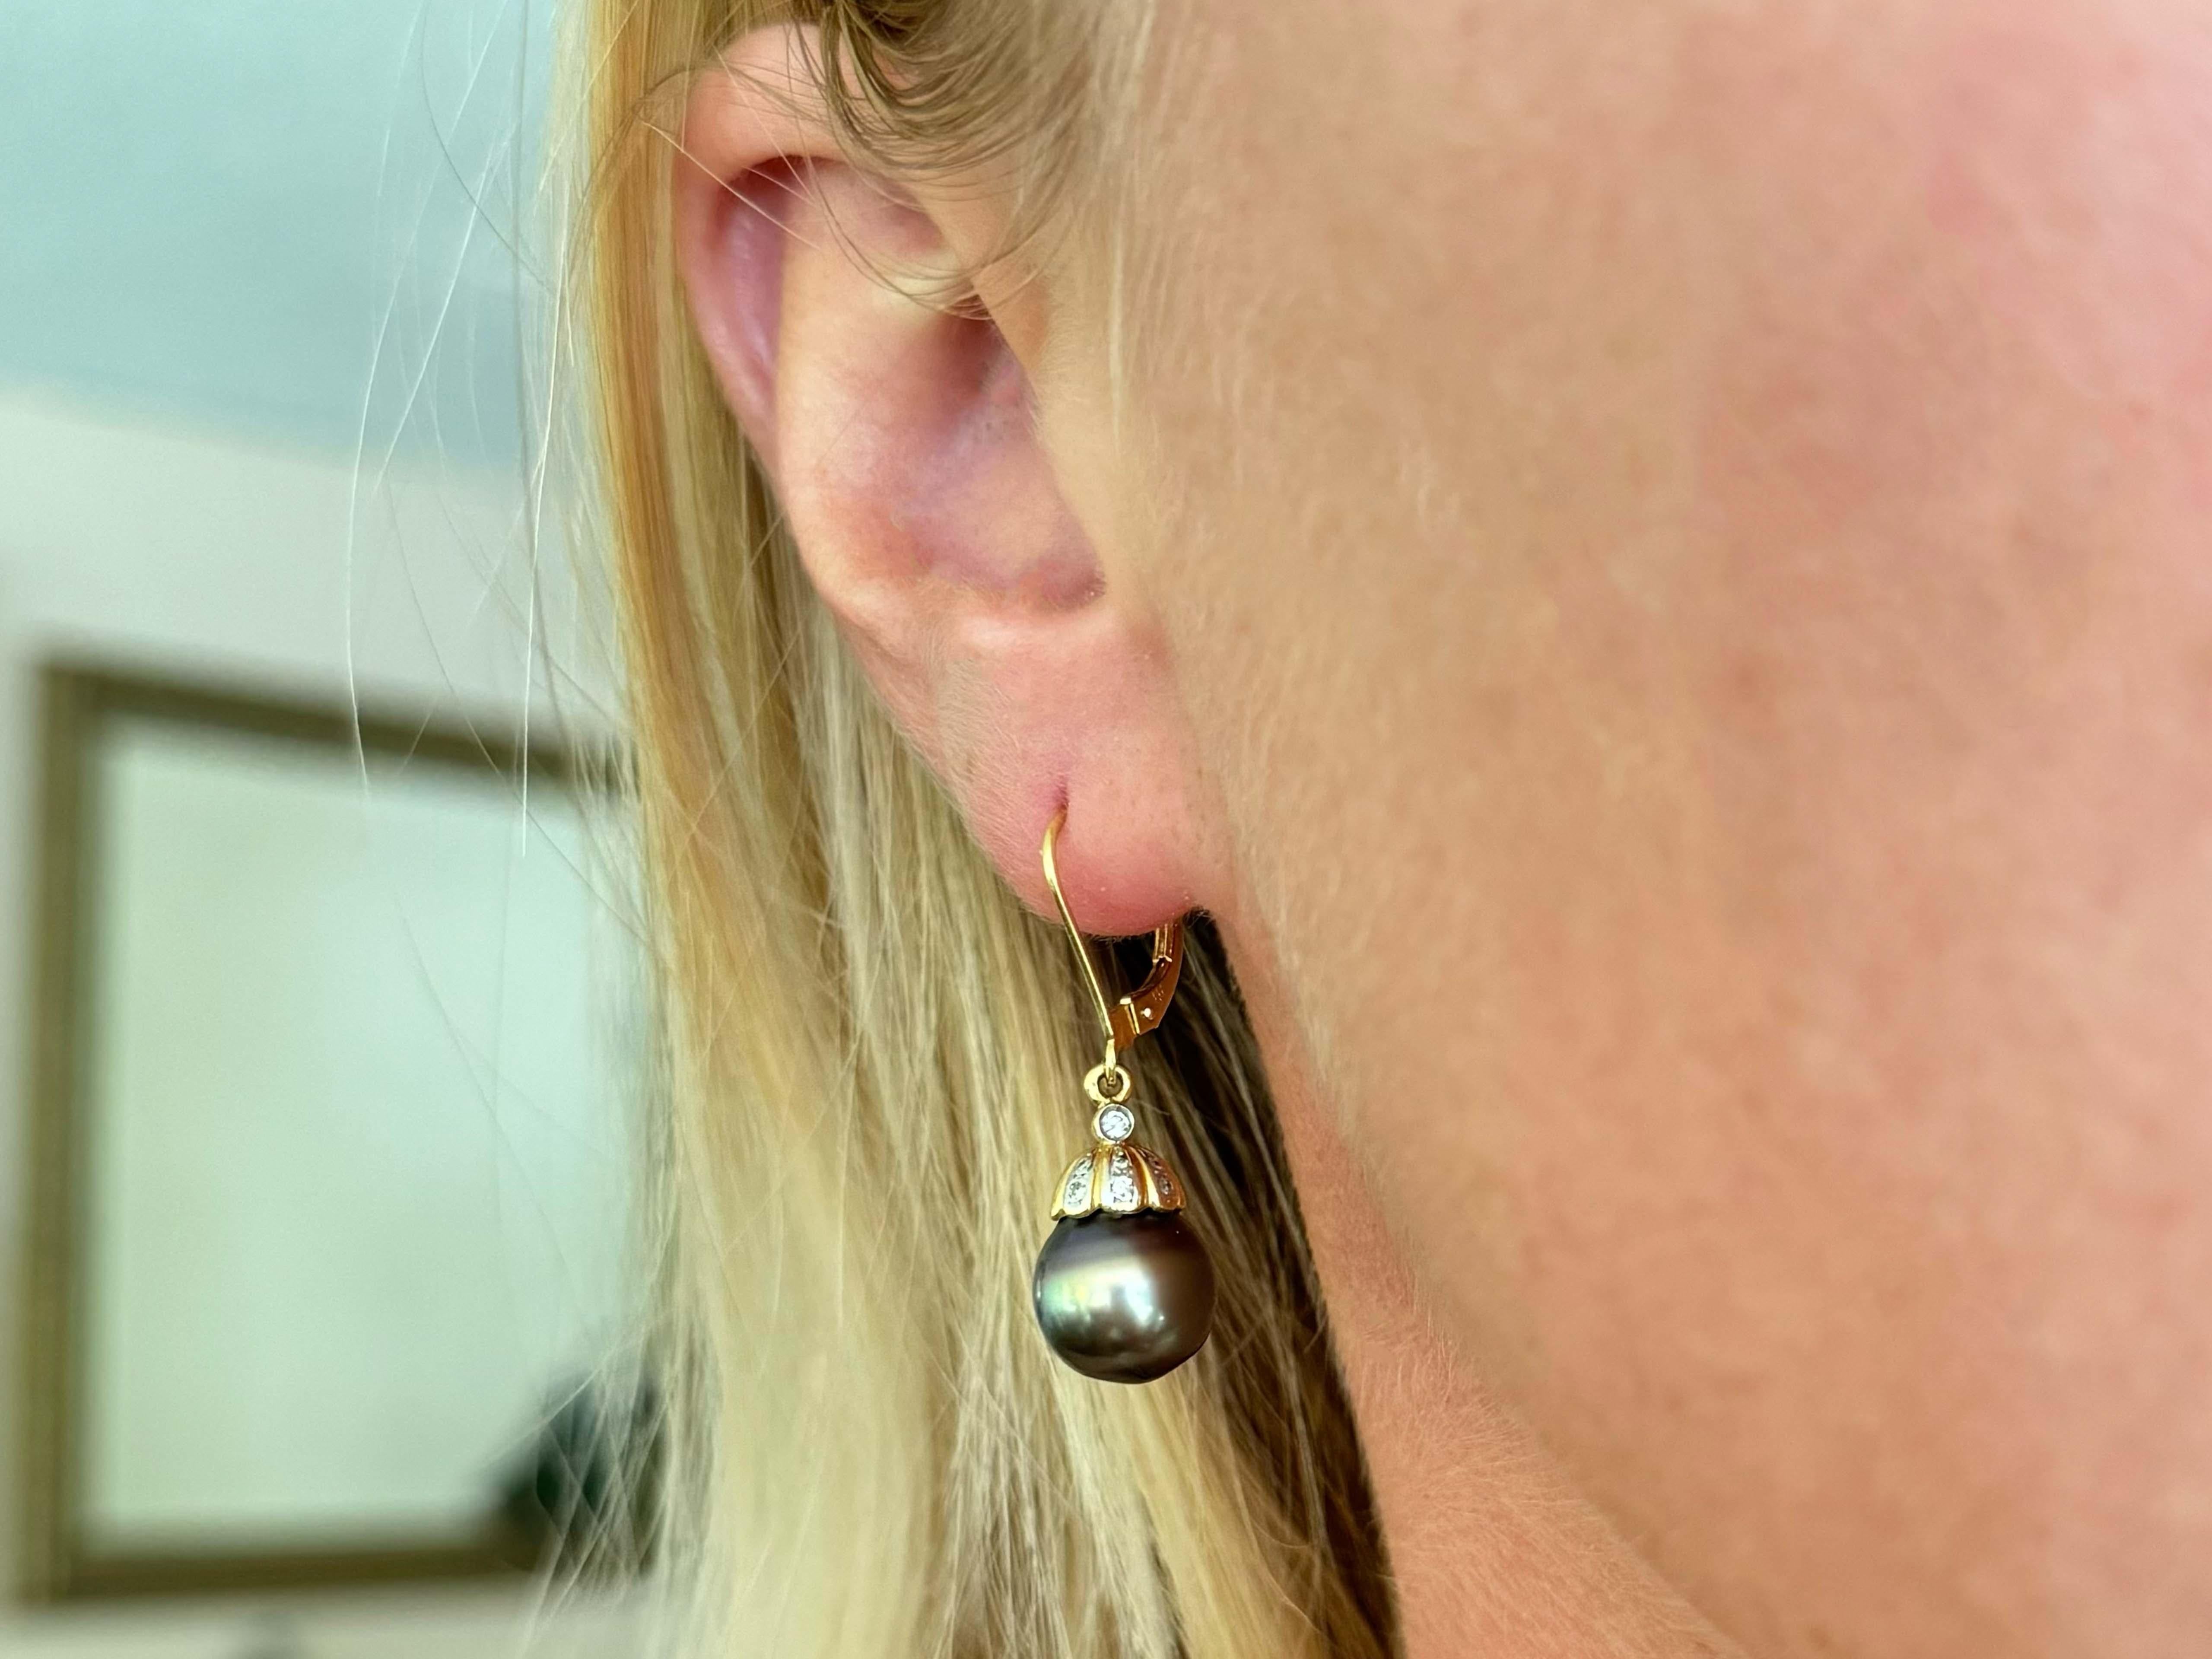 These stunning Tahitian pearls feature pink, green and purple hues.
​
​Earrings Specifications:

Metal: 18k Yellow Gold

Earring Length: 1.25